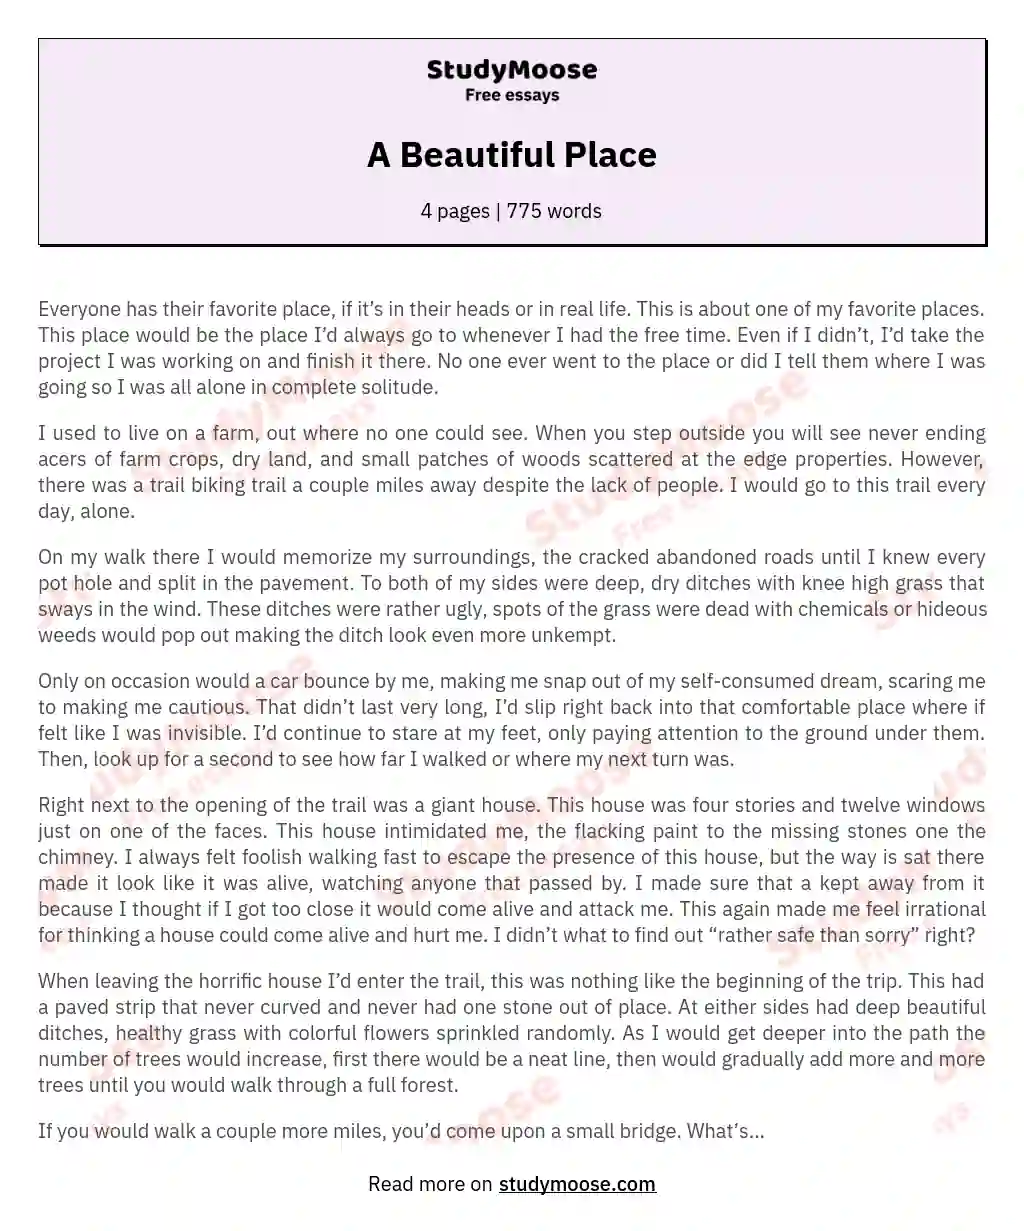 A Beautiful Place essay